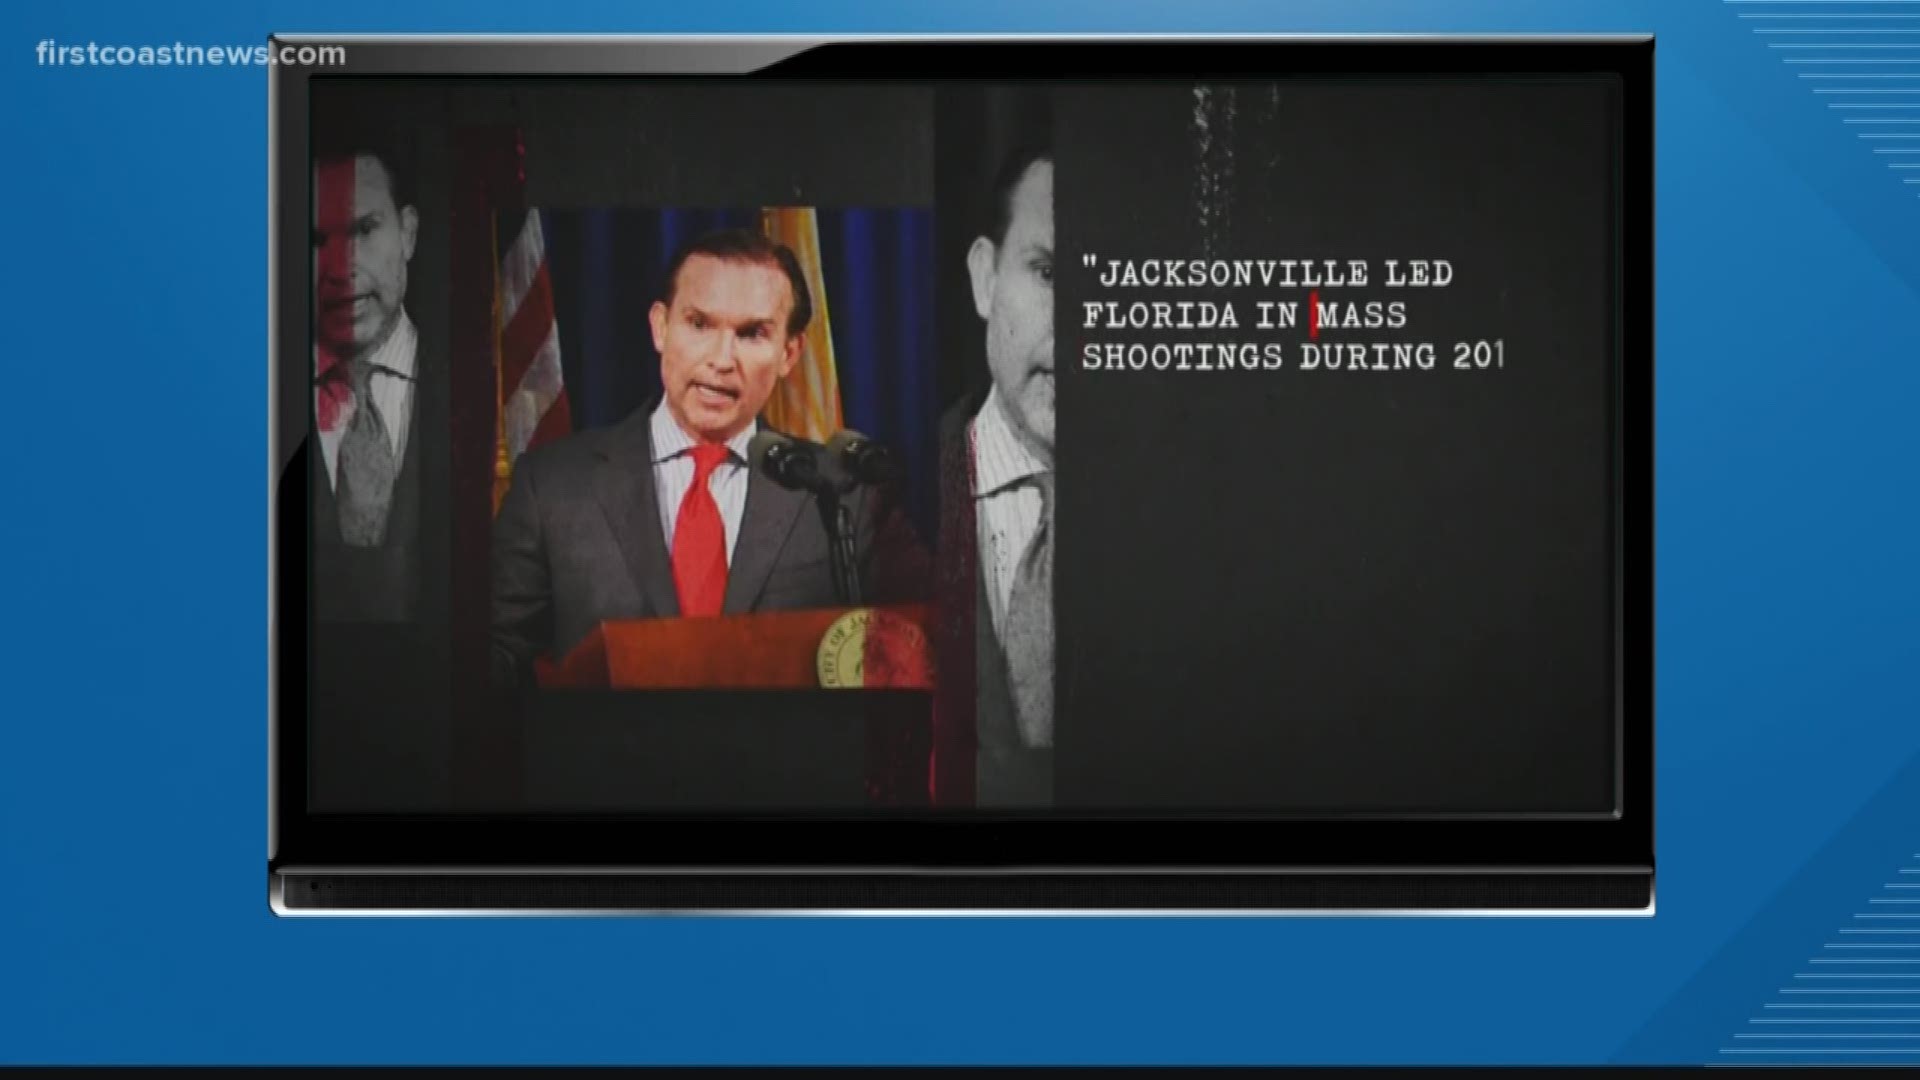 "This ad is the most disgusting and exploitative thing I've seen. The people of Jacksonville deserve better."